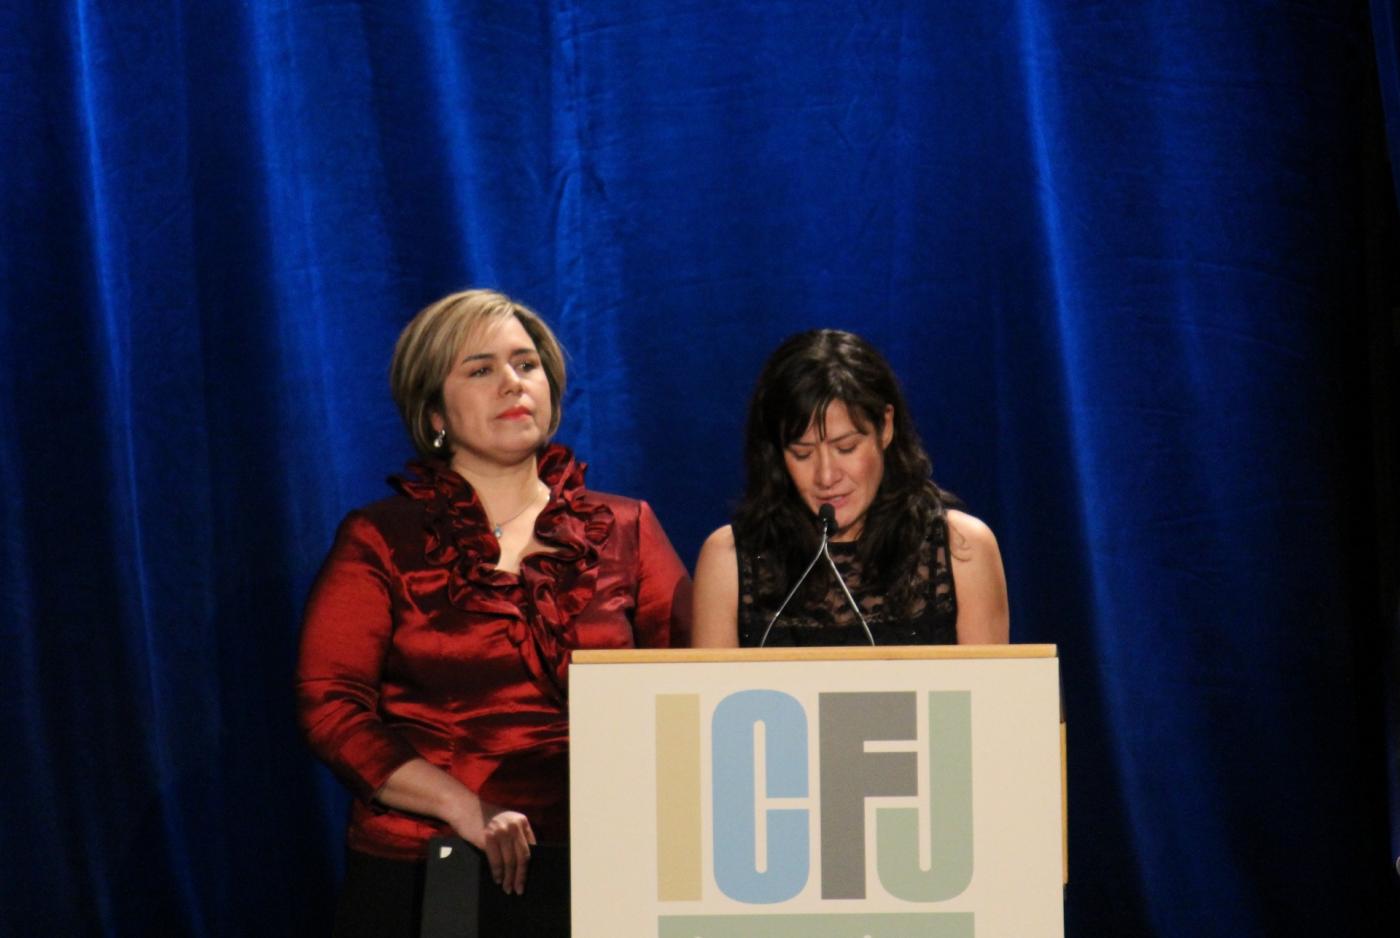 Investigative reporters Rocío Idalia Gallegos Rodríguez and Sandra Rodríguez Nieto receive the 2011 Knight International Journalism Award on Tuesday for their courageous work covering the violent crimes that have overtaken the city of Juarez, Mexico. (Hope Rurik/SHFWire)